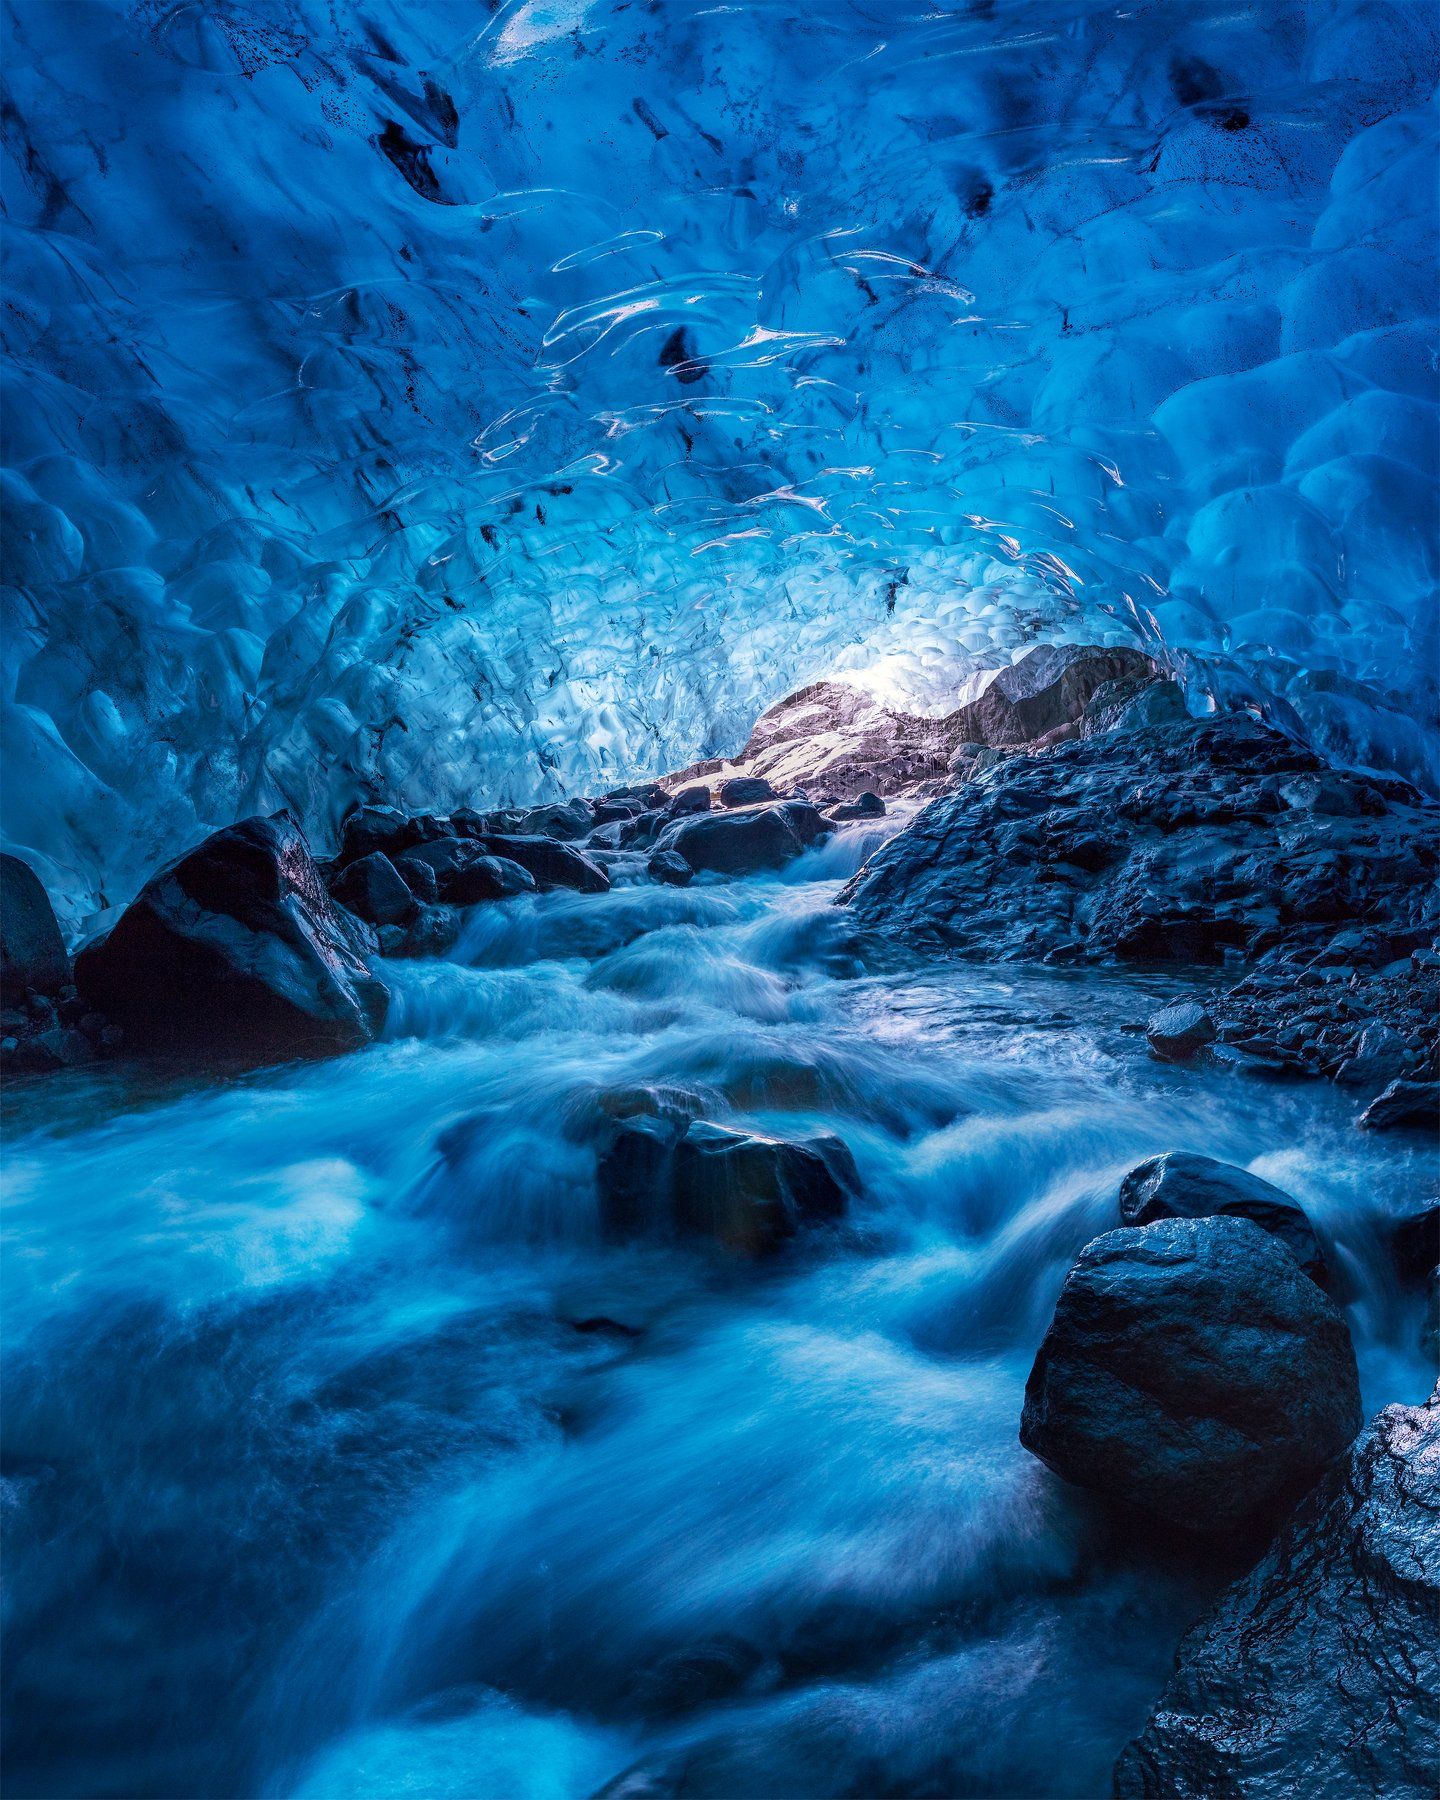 Iceland ice cave, Sergey Merphy